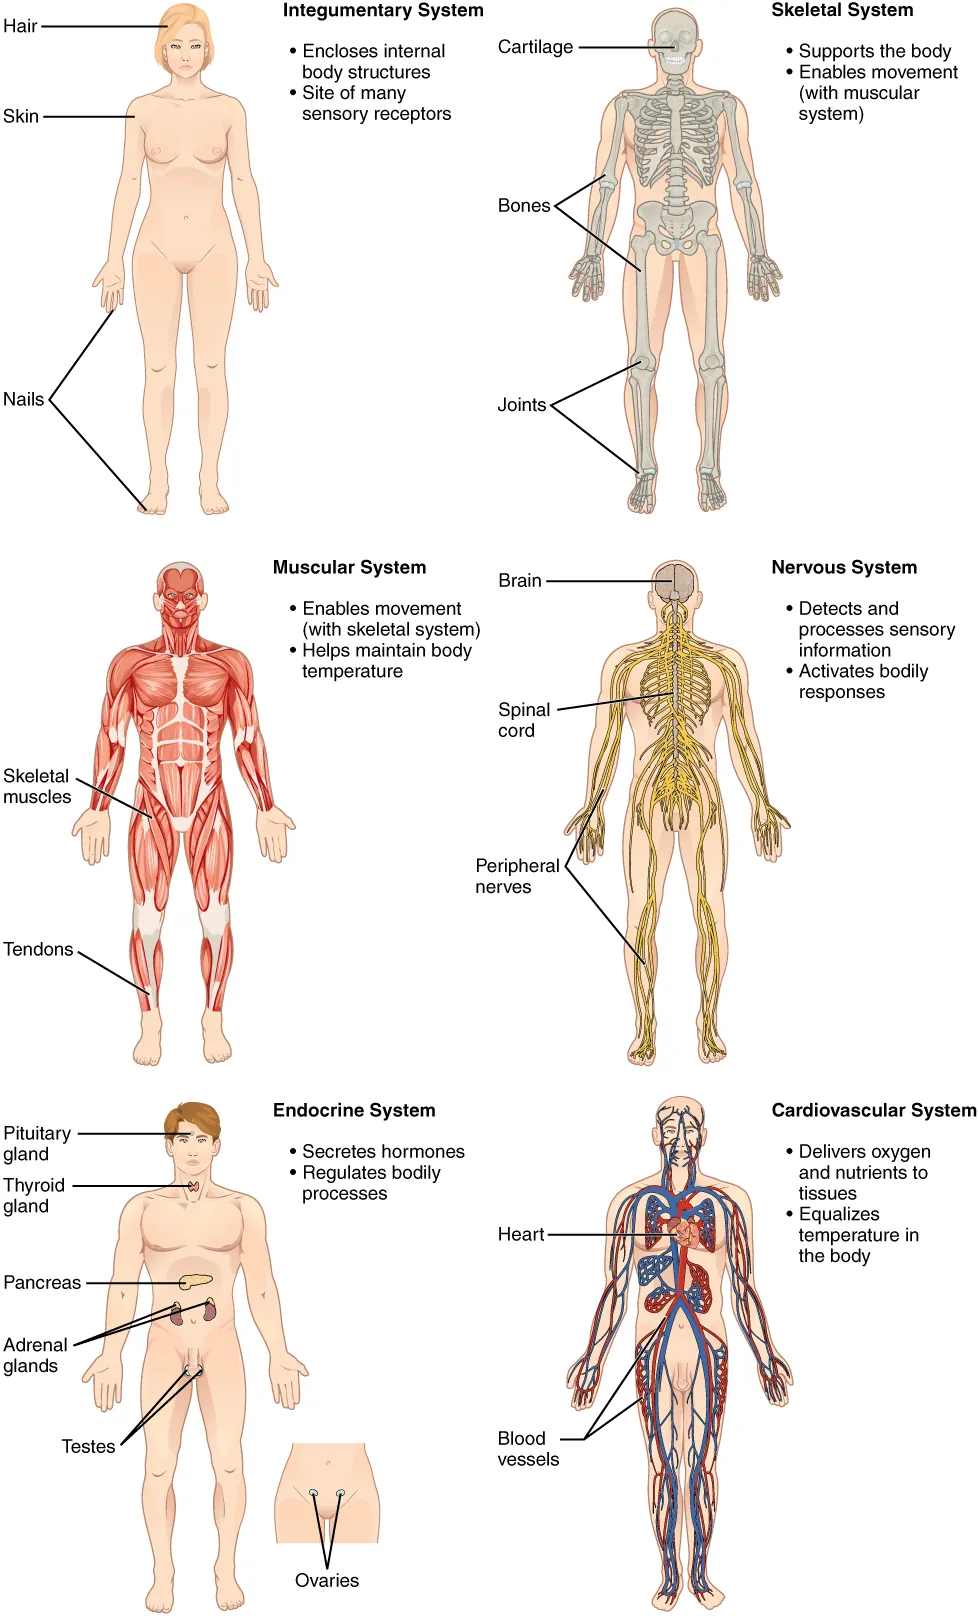 This illustration shows eight silhouettes of a human female, each showing the components of a different organ system. The integumentary system encloses internal body structures and is the site of many sensory receptors. The integumentary system includes the hair, skin, and nails. The skeletal system supports the body and, along with the muscular system, enables movement. The skeletal system includes cartilage, such as that at the tip of the nose, as well as the bones and joints. The muscular system enables movement, along with the skeletal system, but also helps to maintain body temperature. The muscular system includes skeletal muscles, as well as tendons that connect skeletal muscles to bones. The nervous system detects and processes sensory information and activates bodily responses. The nervous system includes the brain, spinal cord, and peripheral nerves, such as those located in the limbs. The endocrine system secretes hormones and regulates bodily processes. The endocrine system includes the pituitary gland in the brain, the thyroid gland in the throat, the pancreas in the abdomen, the adrenal glands on top of the kidneys, and the testes in the scrotum of males as well as the ovaries in the pelvic region of females. The cardiovascular system delivers oxygen and nutrients to the tissues as well as equalizes temperature in the body. The cardiovascular system includes the heart and blood vessels.